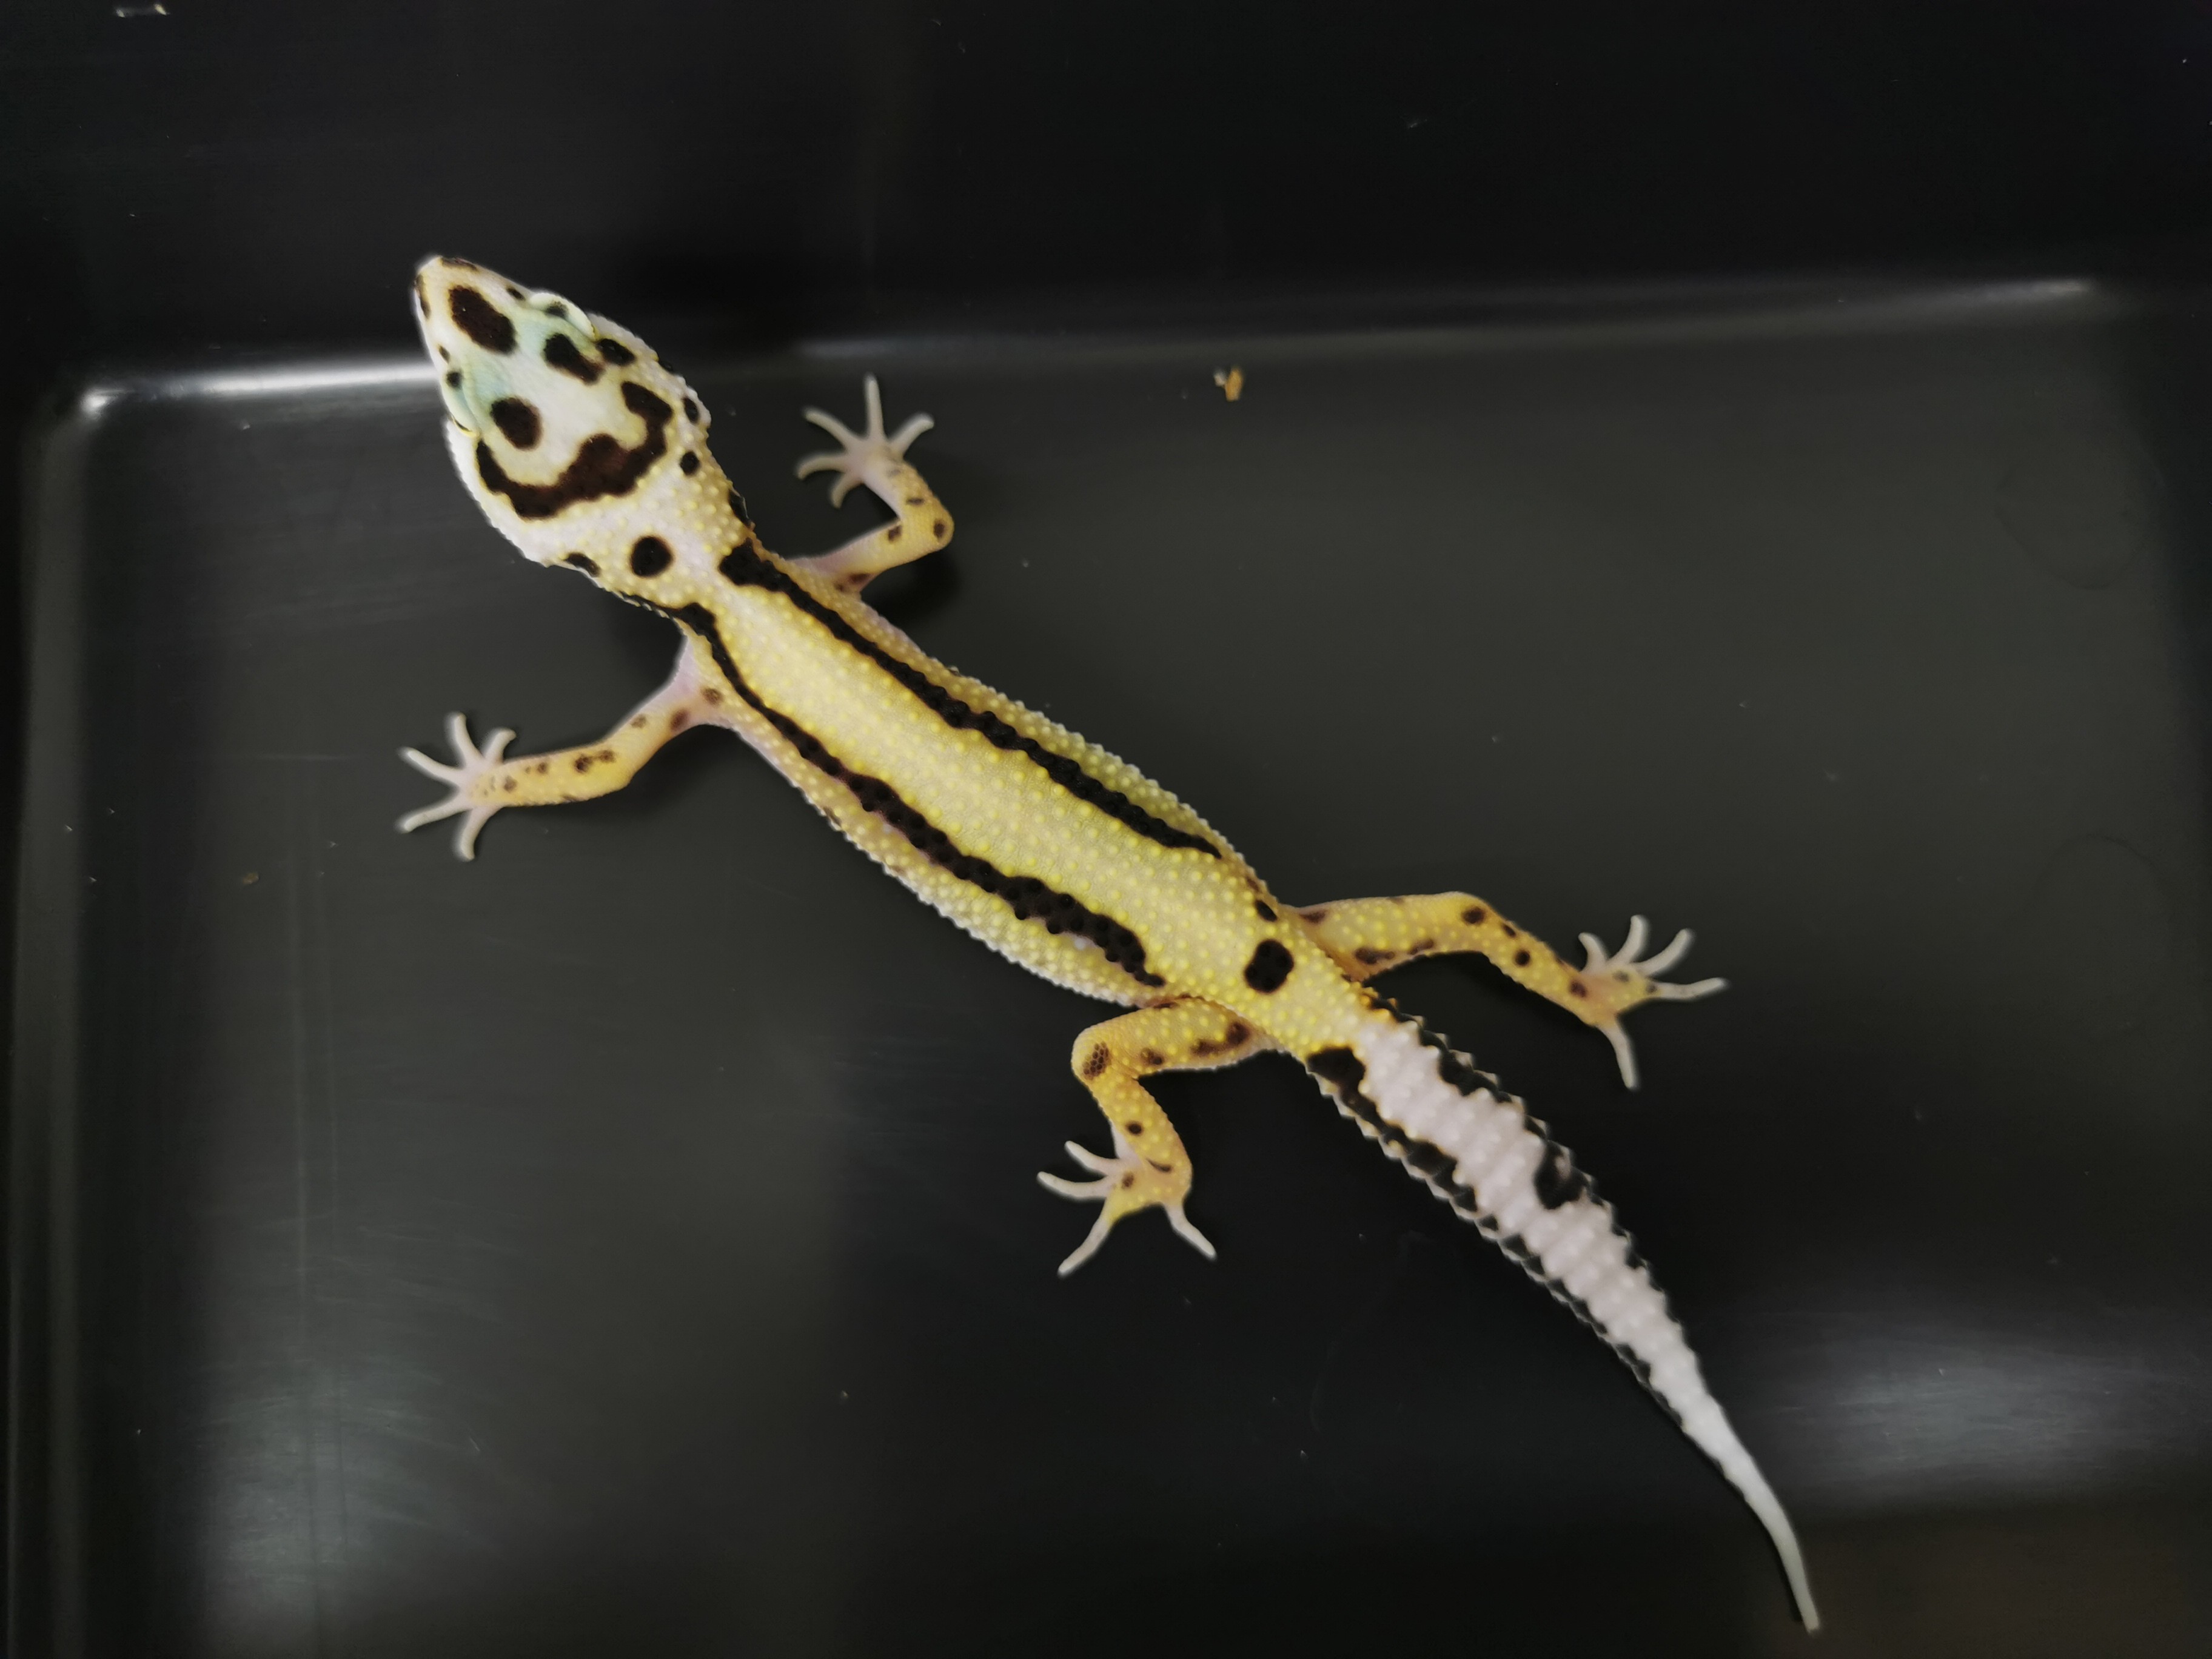 Bandit Leopard Gecko by The Reptile Ark